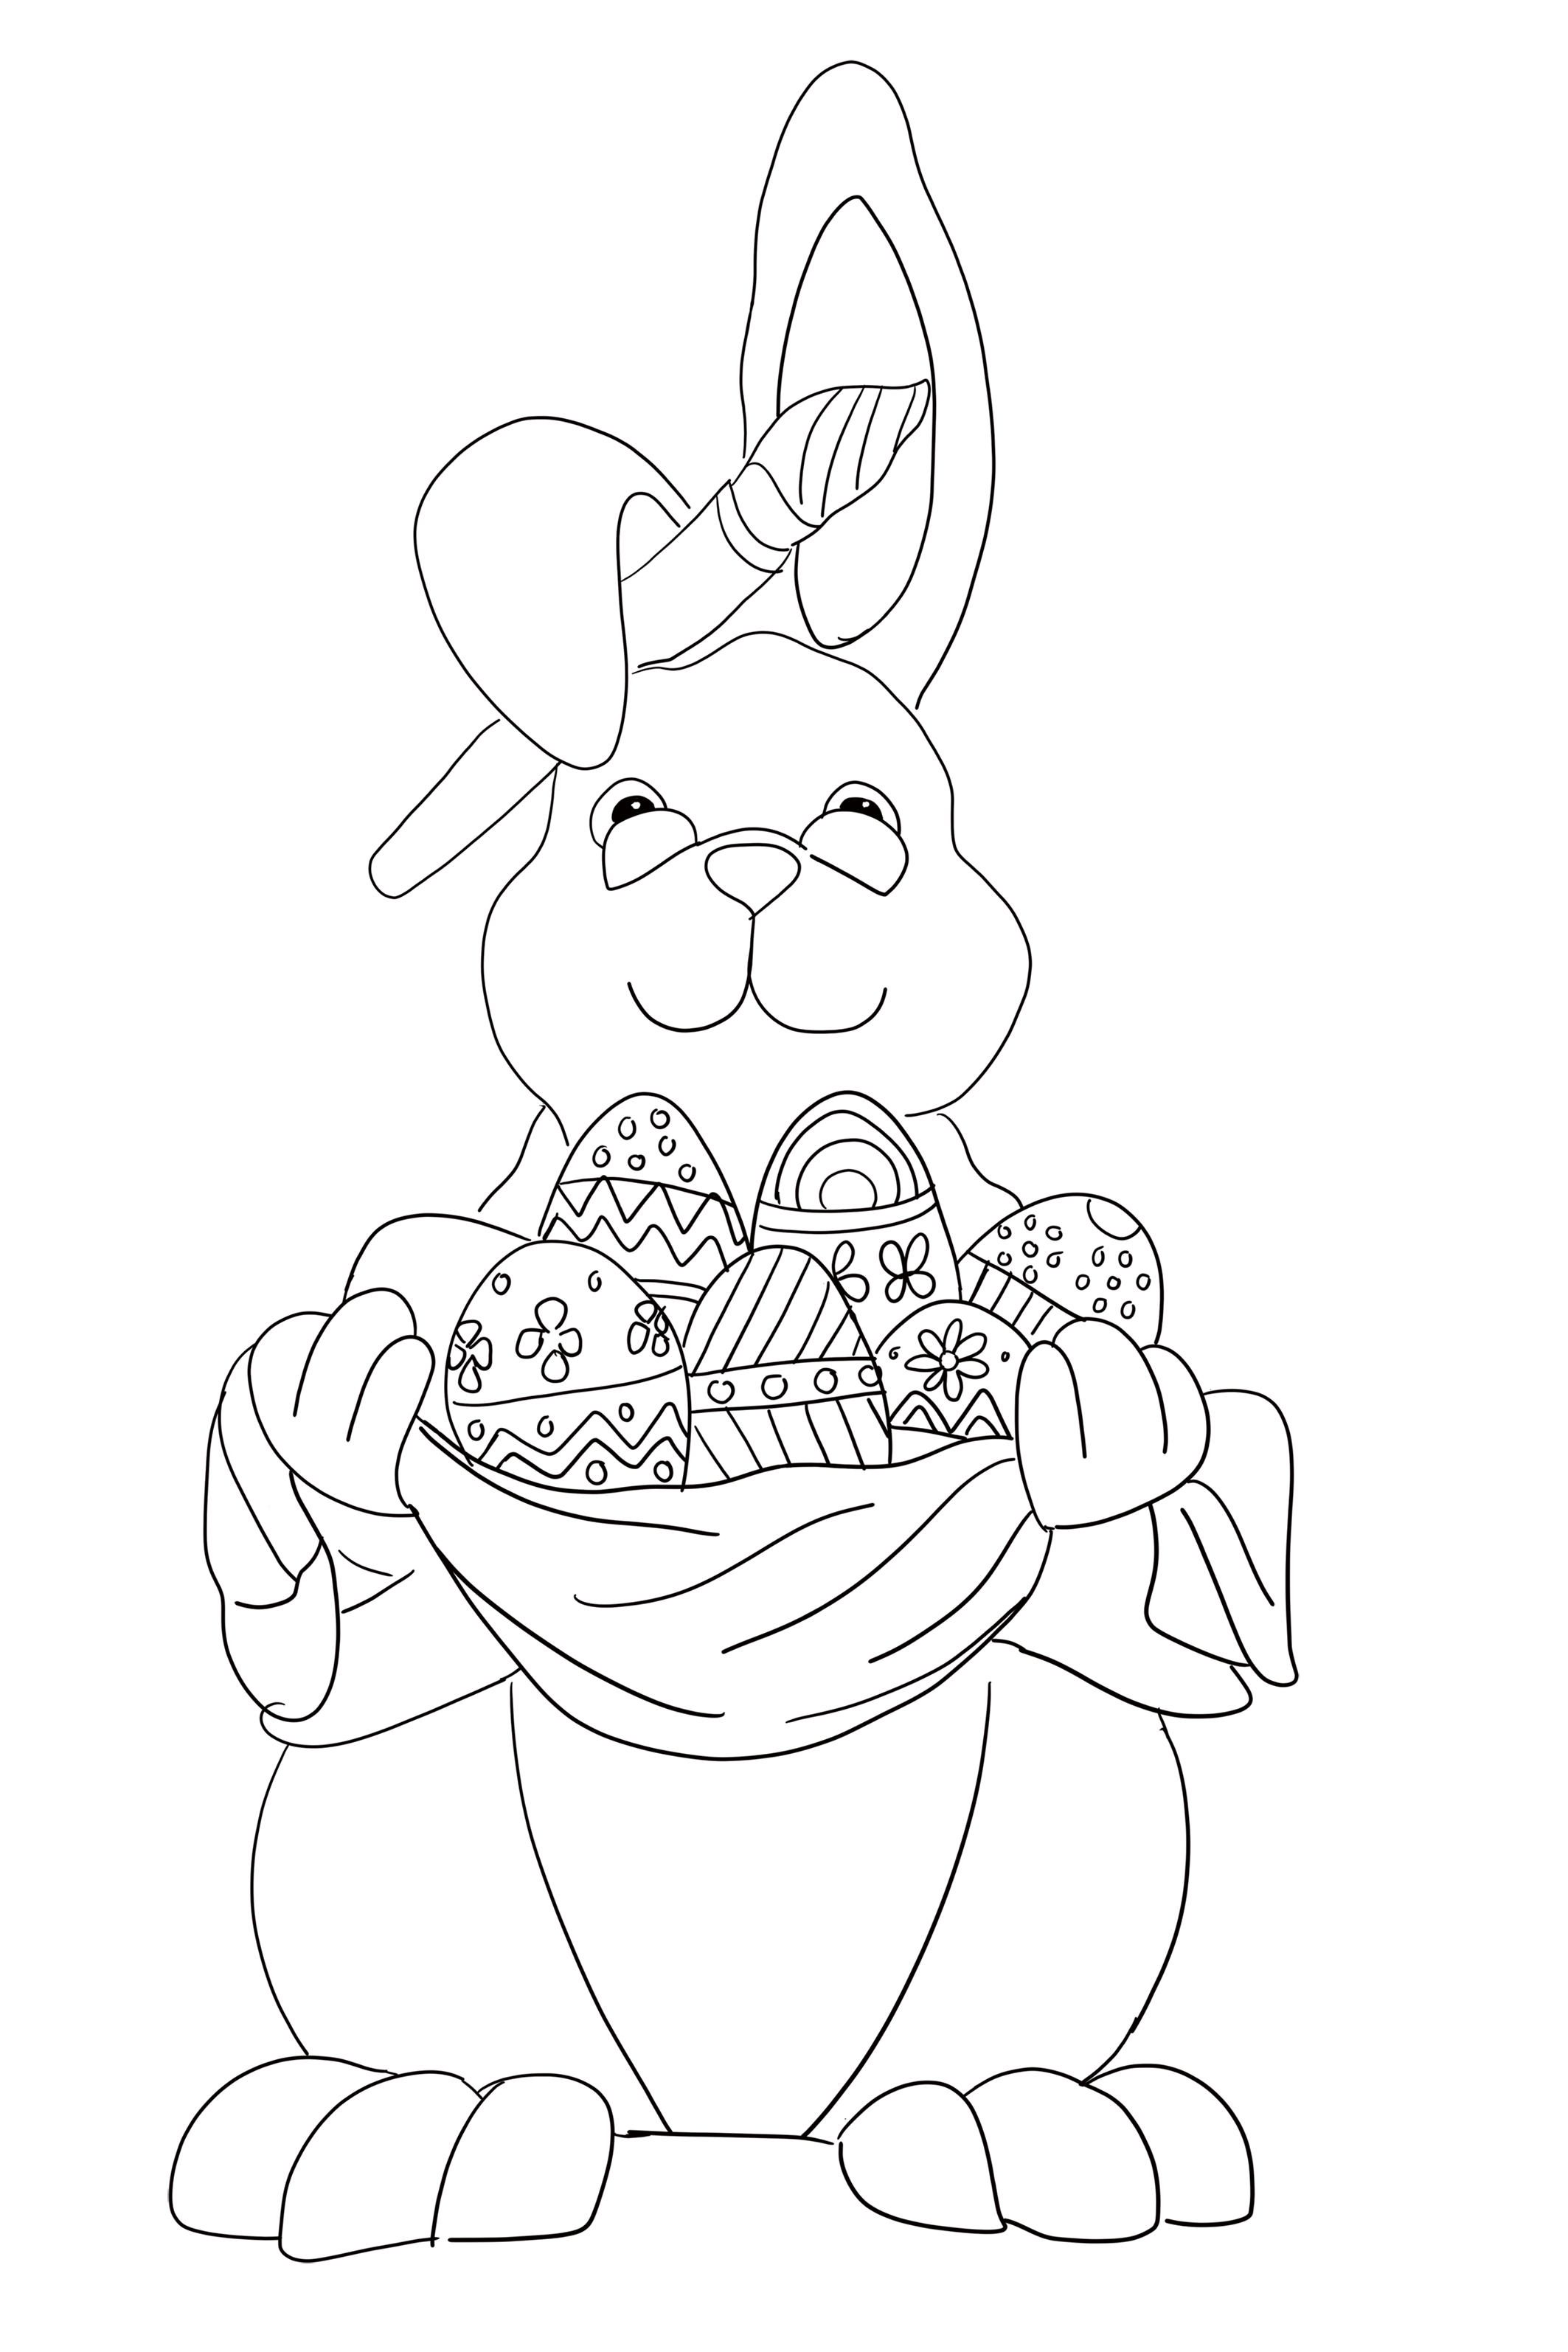 Easter coloring pages: Easter hare with eggs and paintbrush.